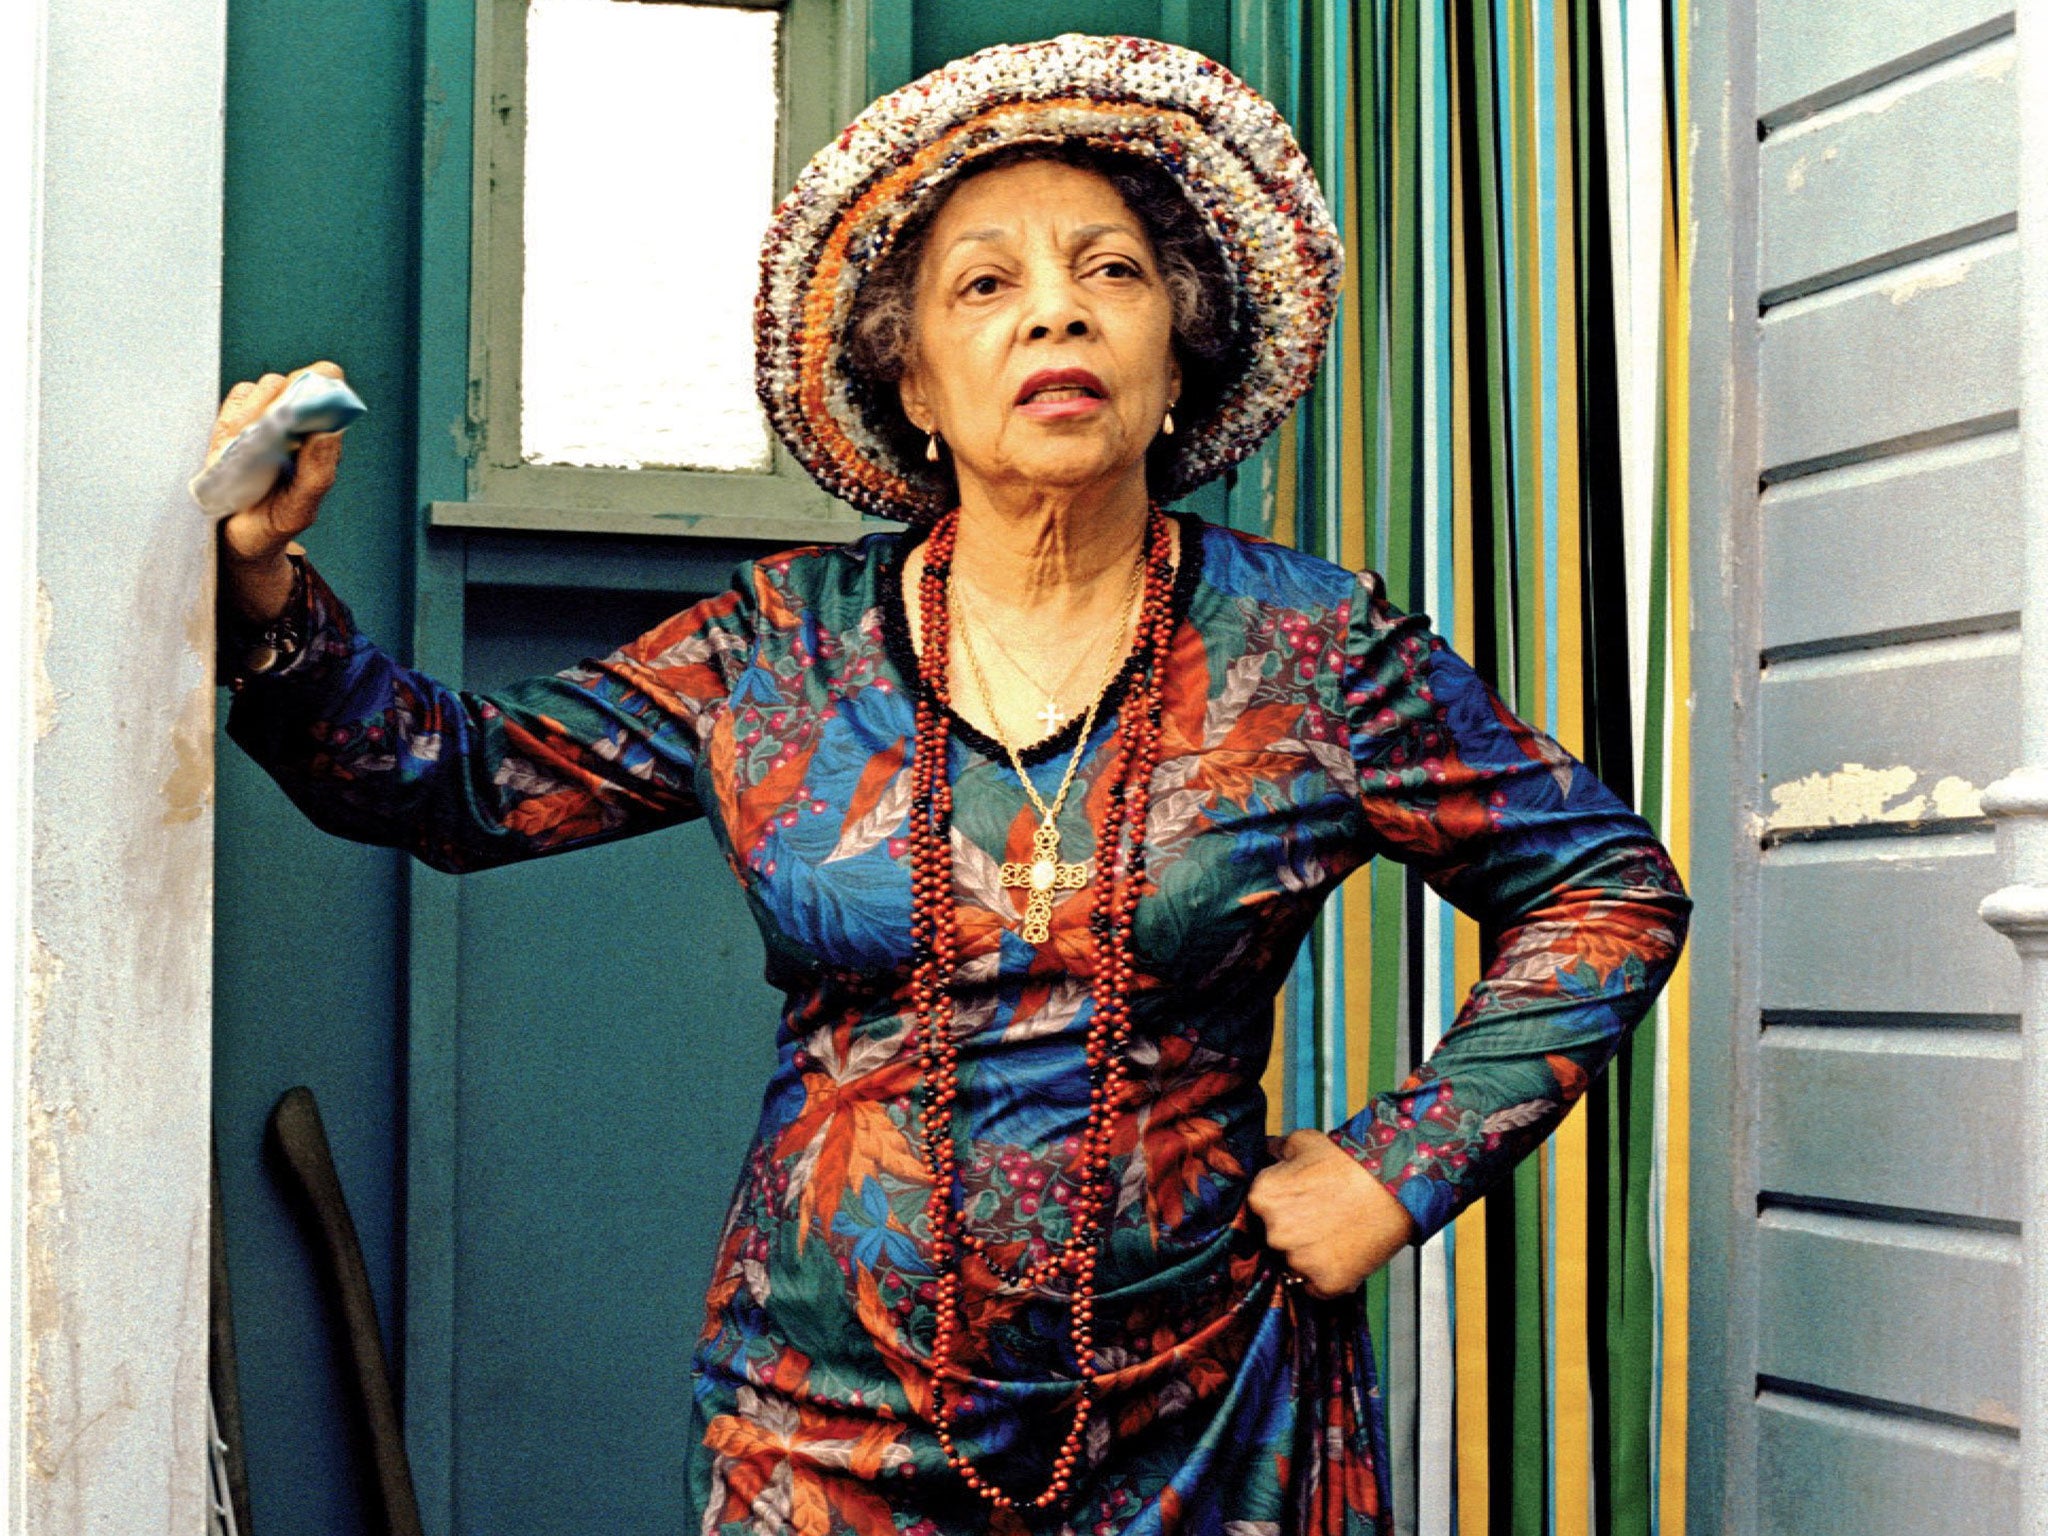 Actress and activist Ruby Dee died on 11 June 2014 aged 91